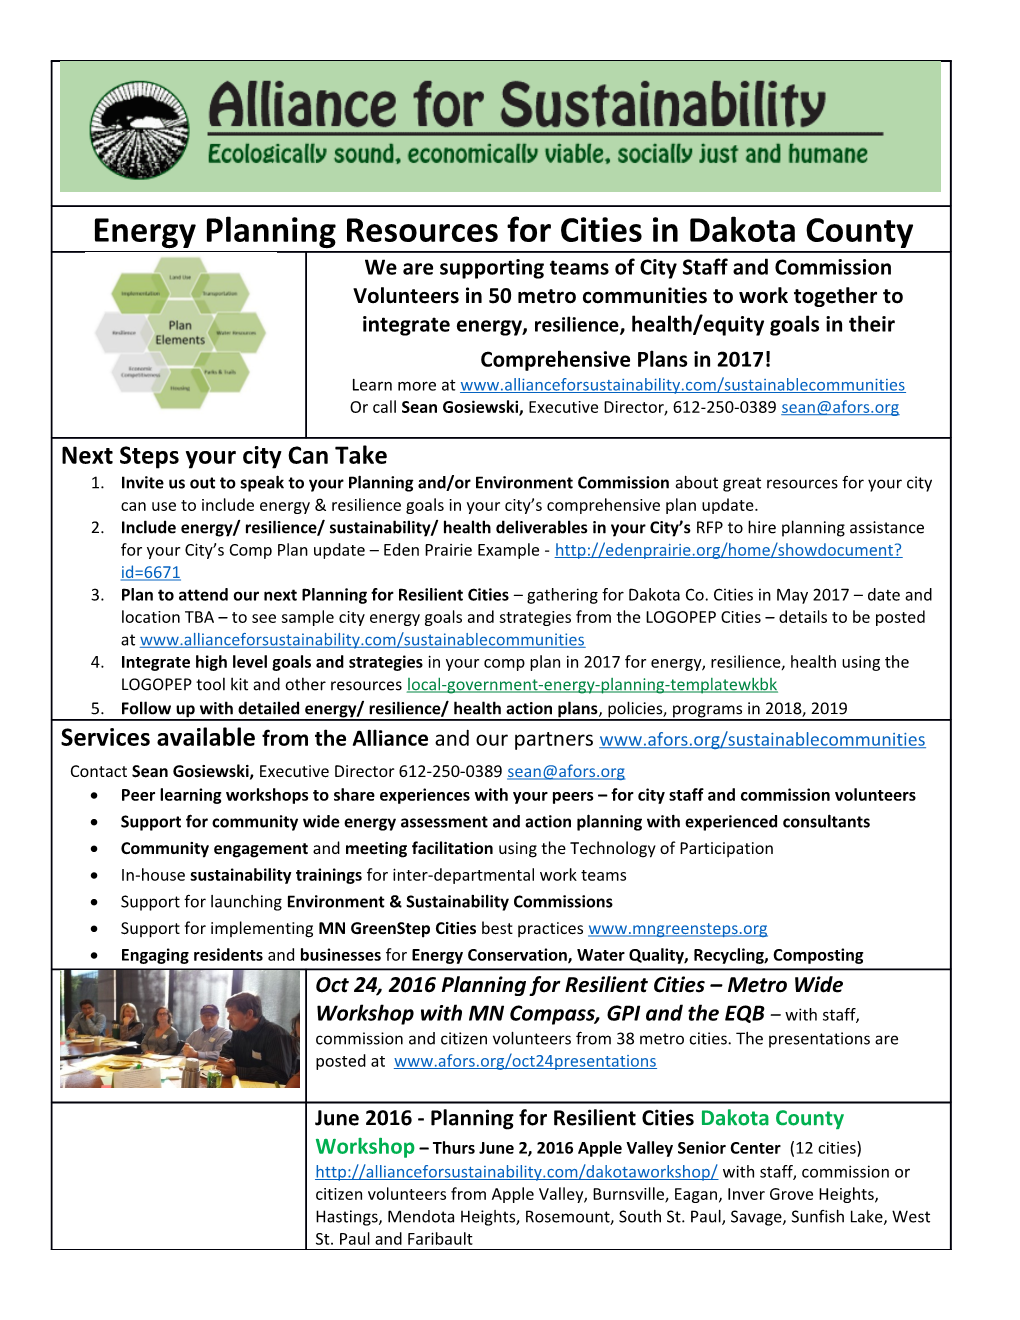 Invite Us out to Speak to Your Planning And/Or Environment Commission About Great Resources